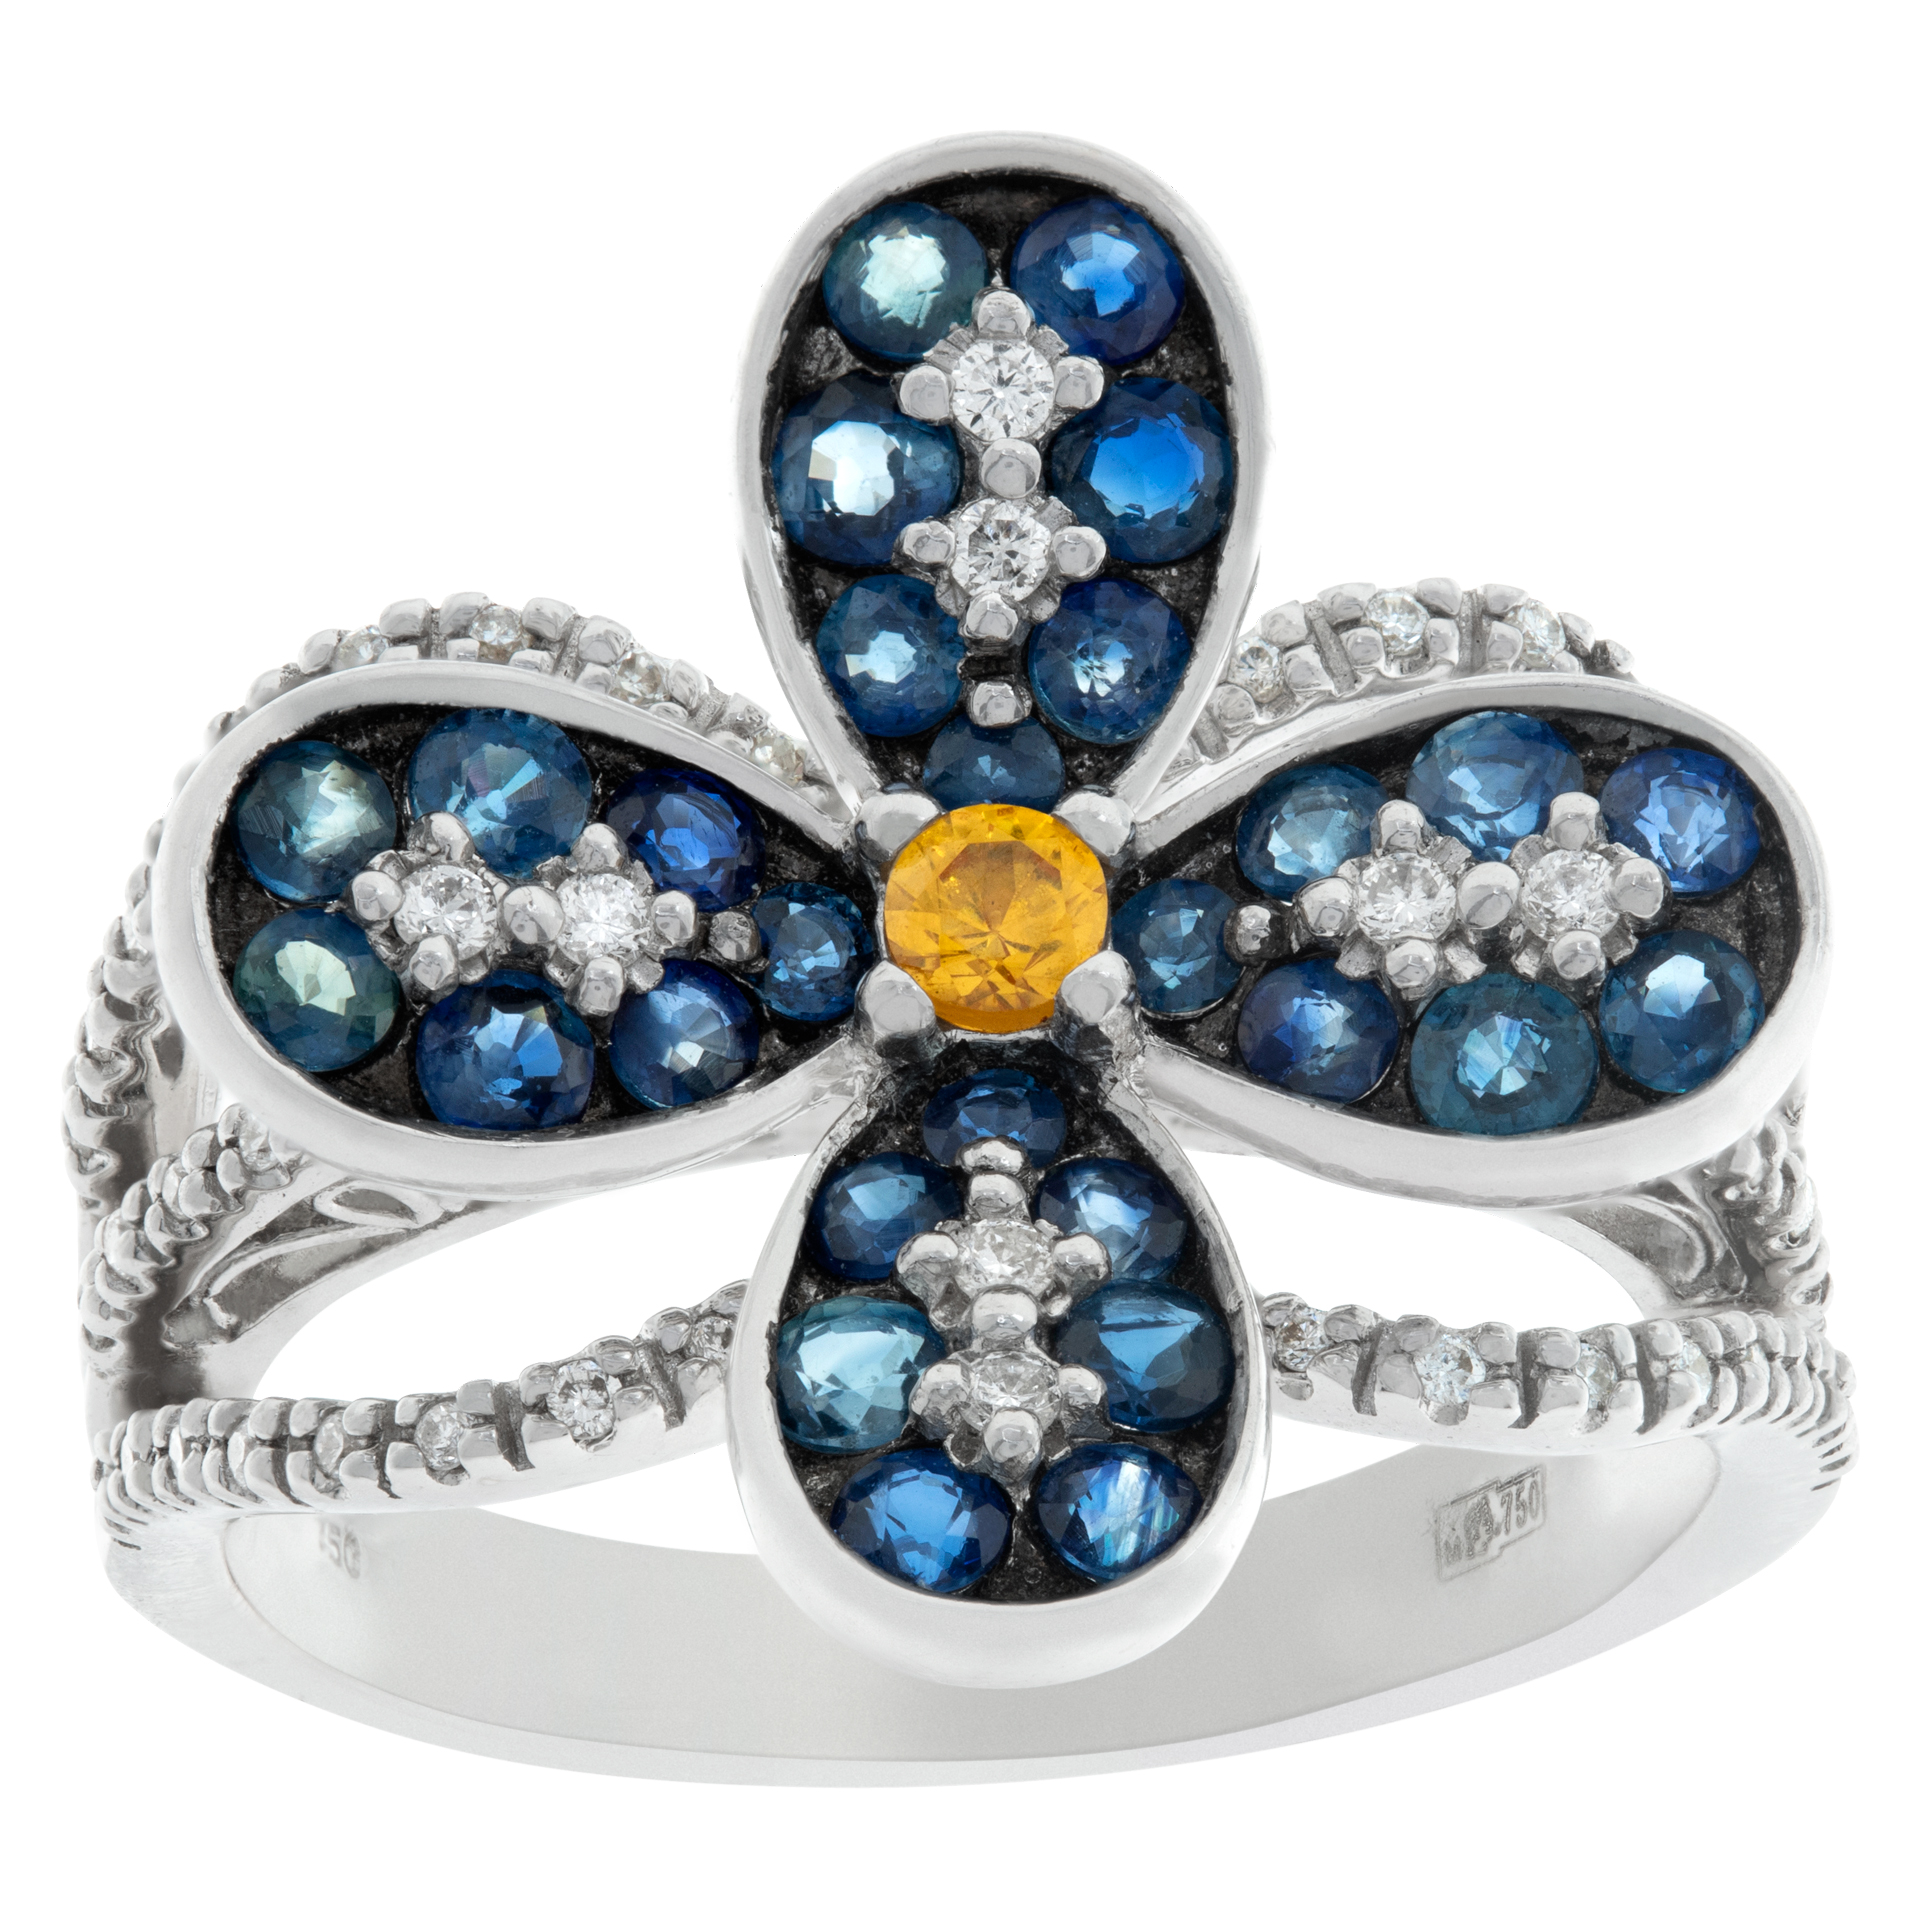 Colorful floral design 18k white gold micro pave diamond ring with blue/yellow sapphires